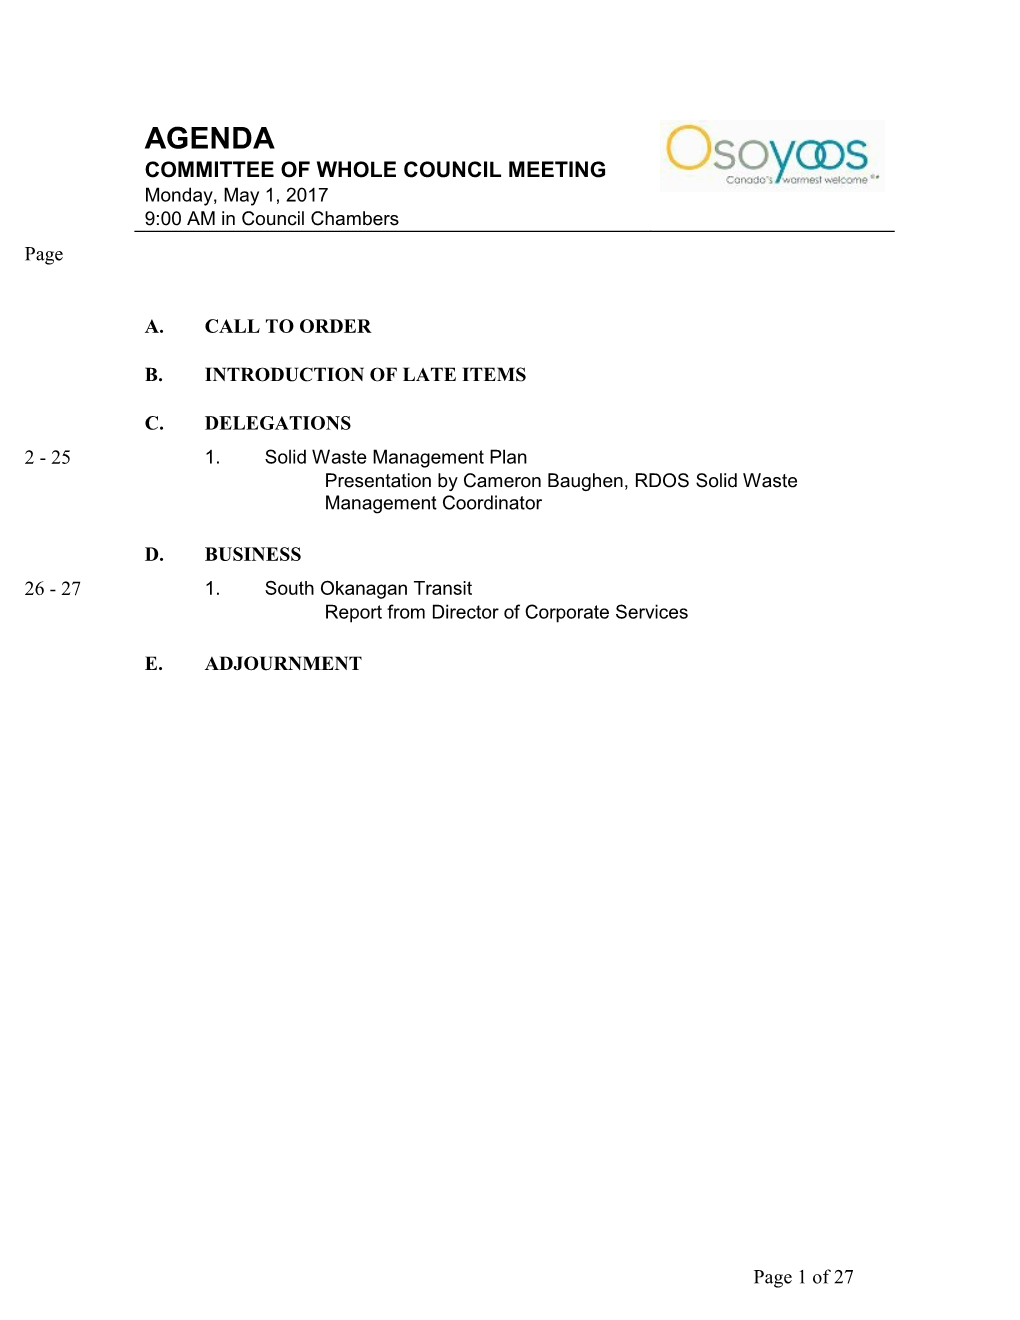 Committee of the Whole Agenda for the Meeting Held on Monday, May 1St, 2017